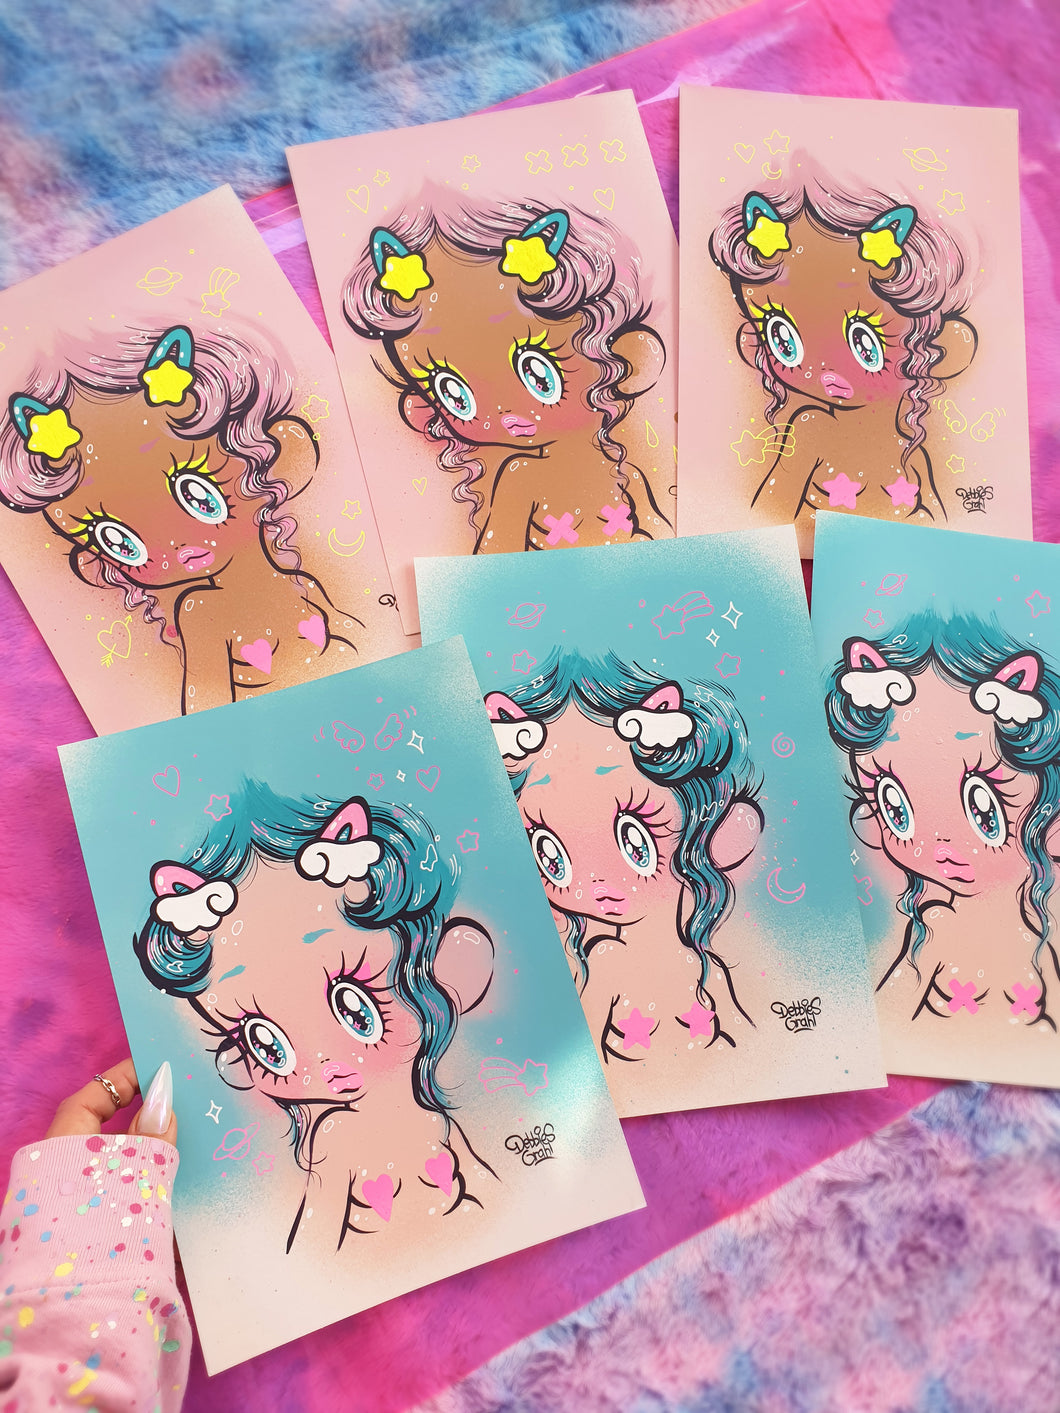 Whimsy Babes Original Paintings - Limited Series, Only 6 made!